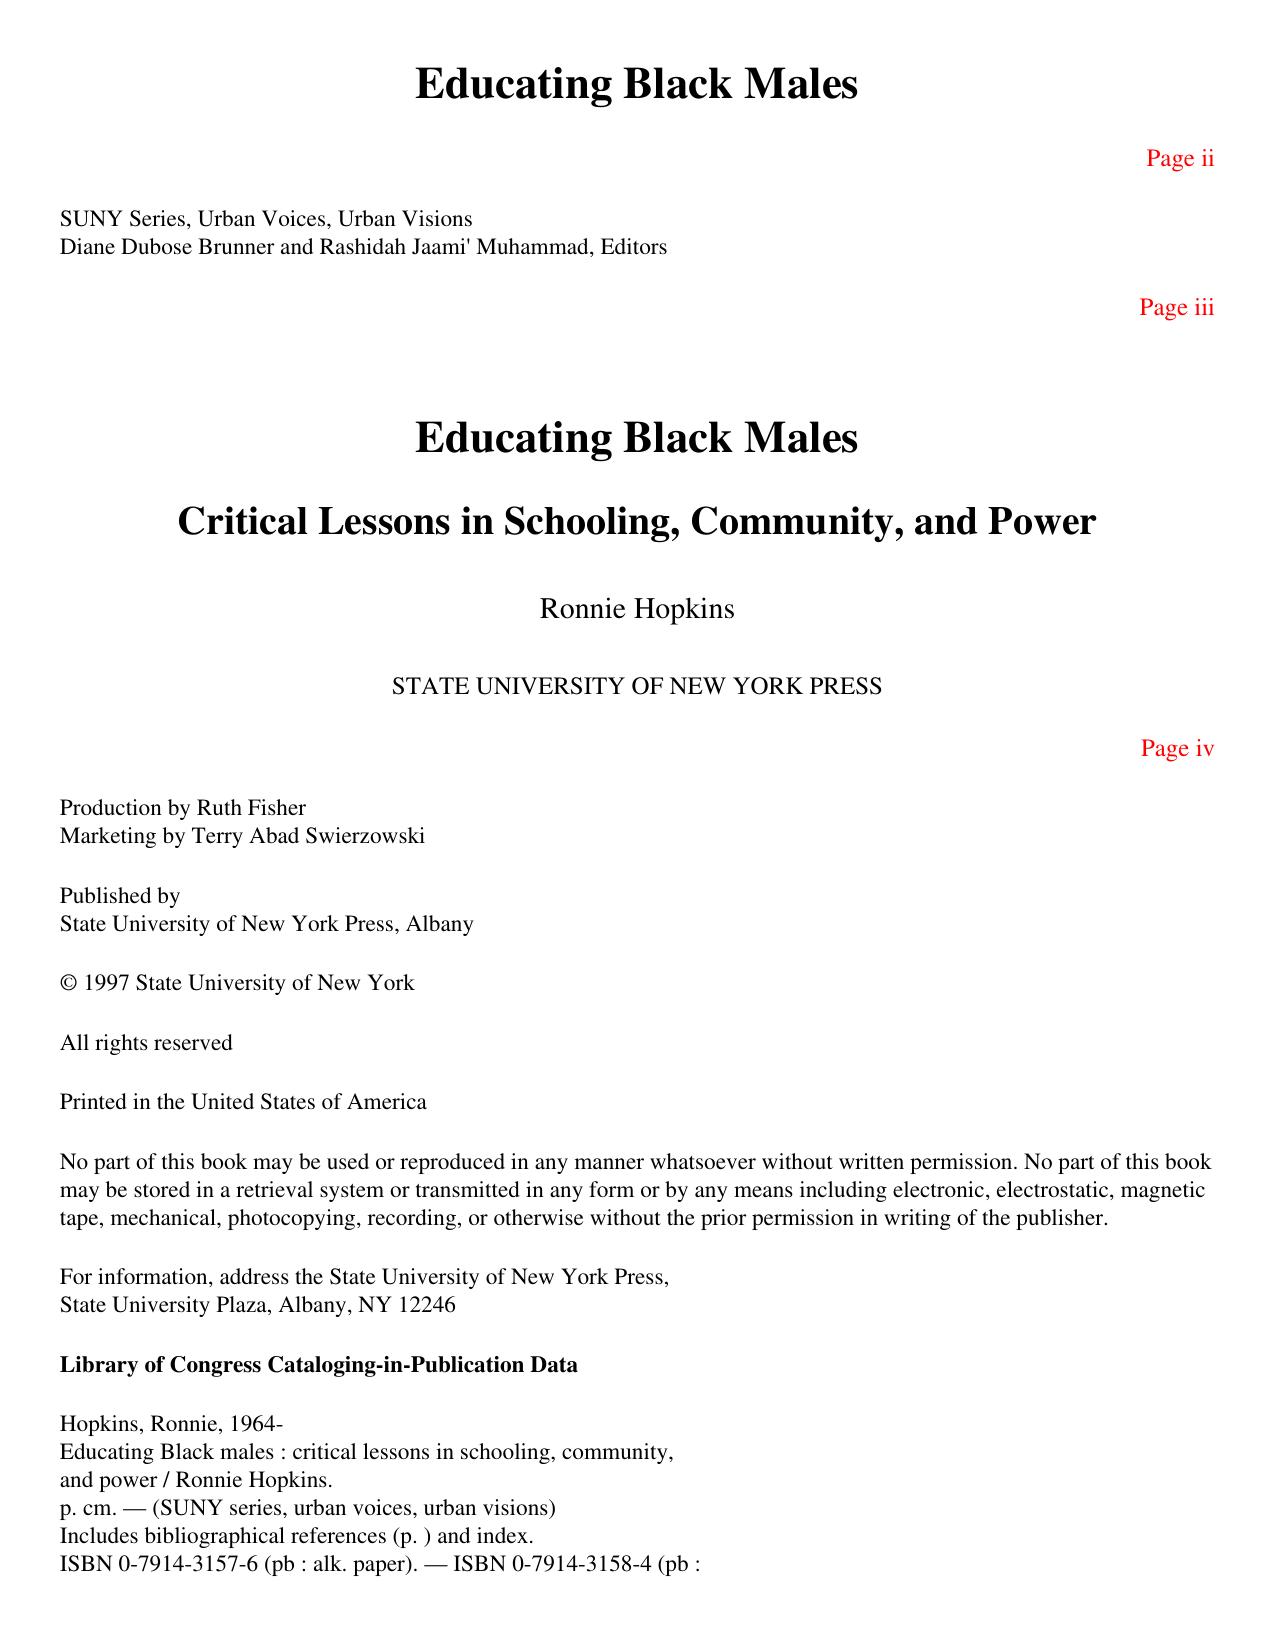 Educating Black Males : Critical Lessons in Schooling, Community, and Power by Ronnie Hopkins